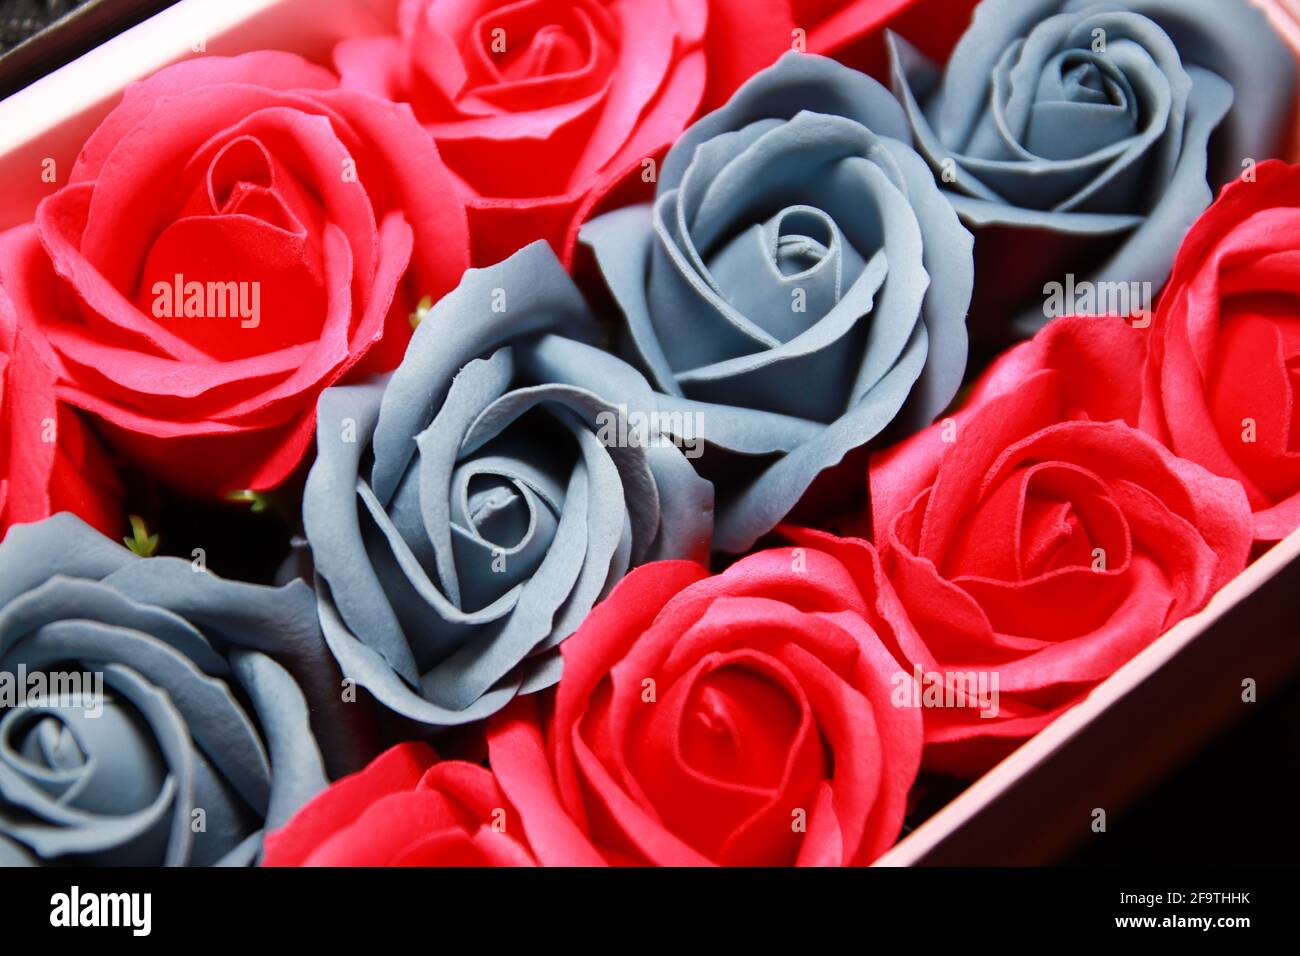 Red and grey roses background. Artificial flowers. Stock Photo